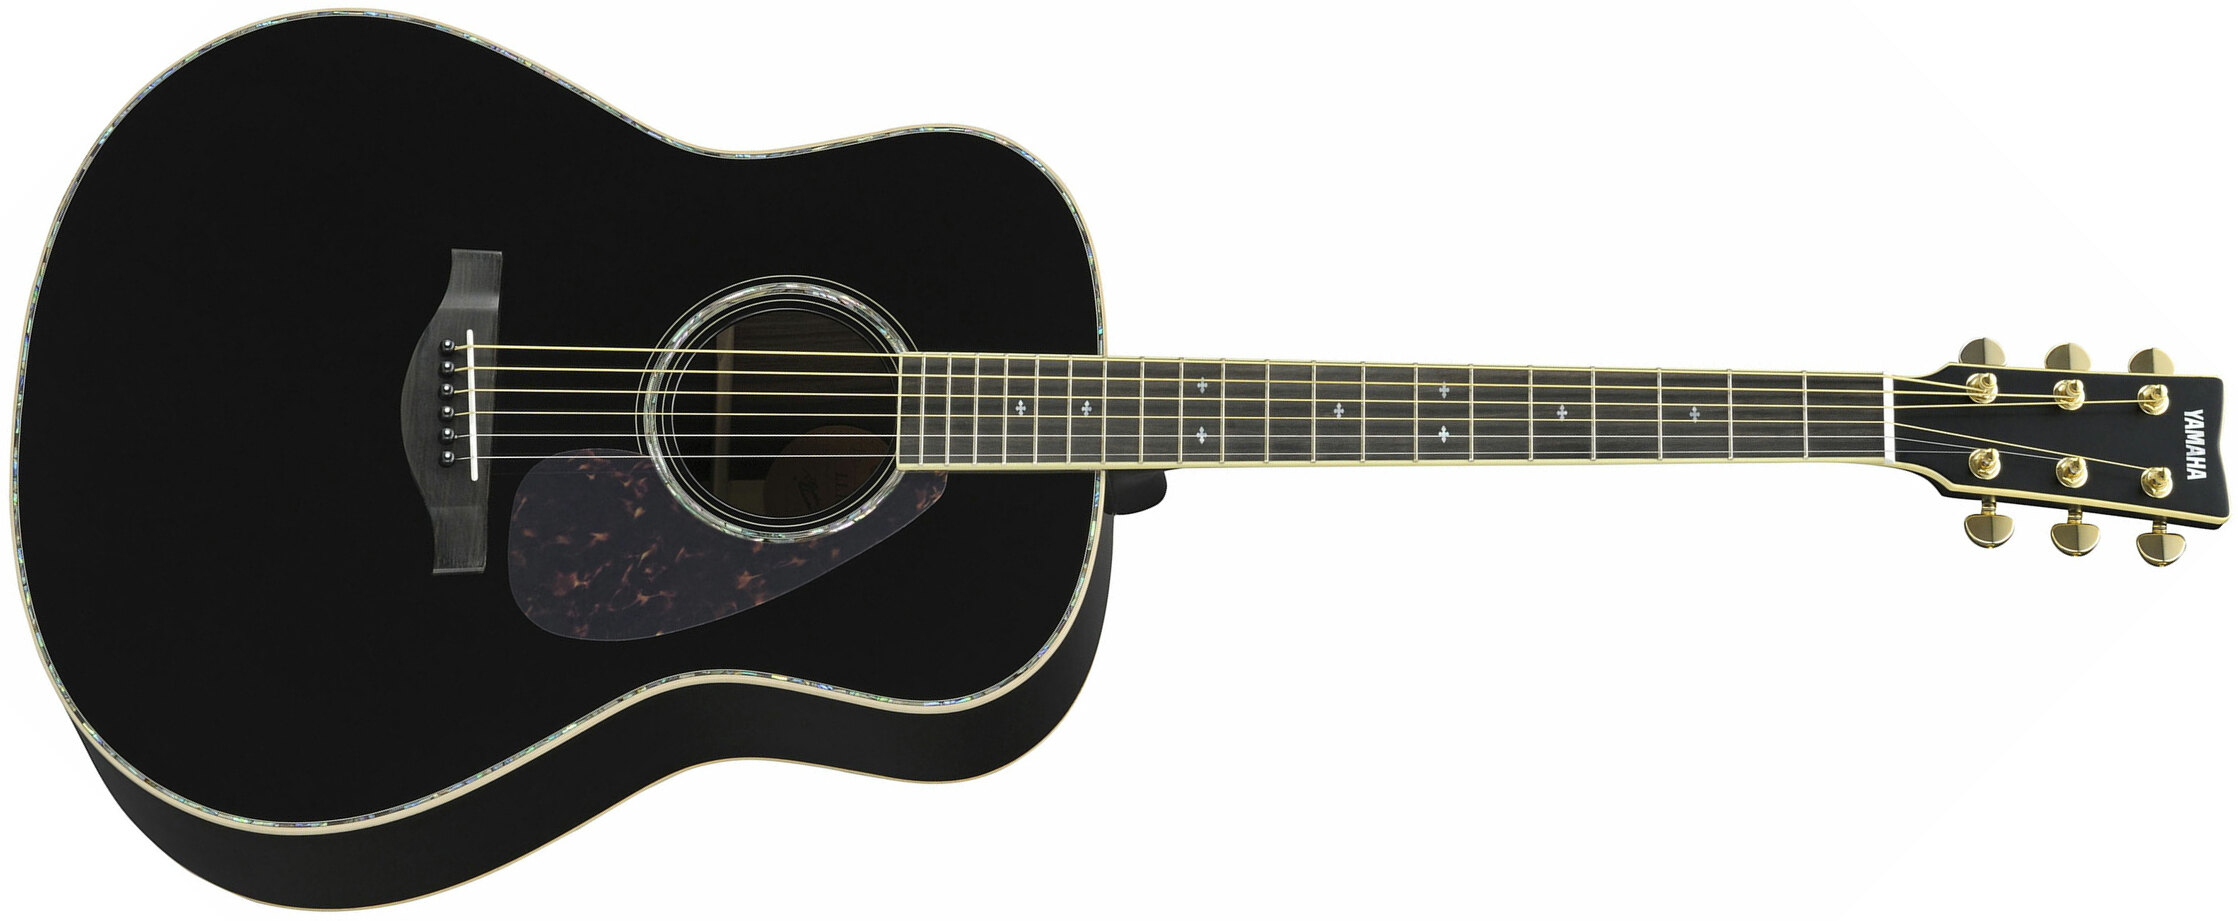 Yamaha Ll16d Are Deluxe Jumbo Epicea Palissandre Eb - Black - Guitare Electro Acoustique - Main picture